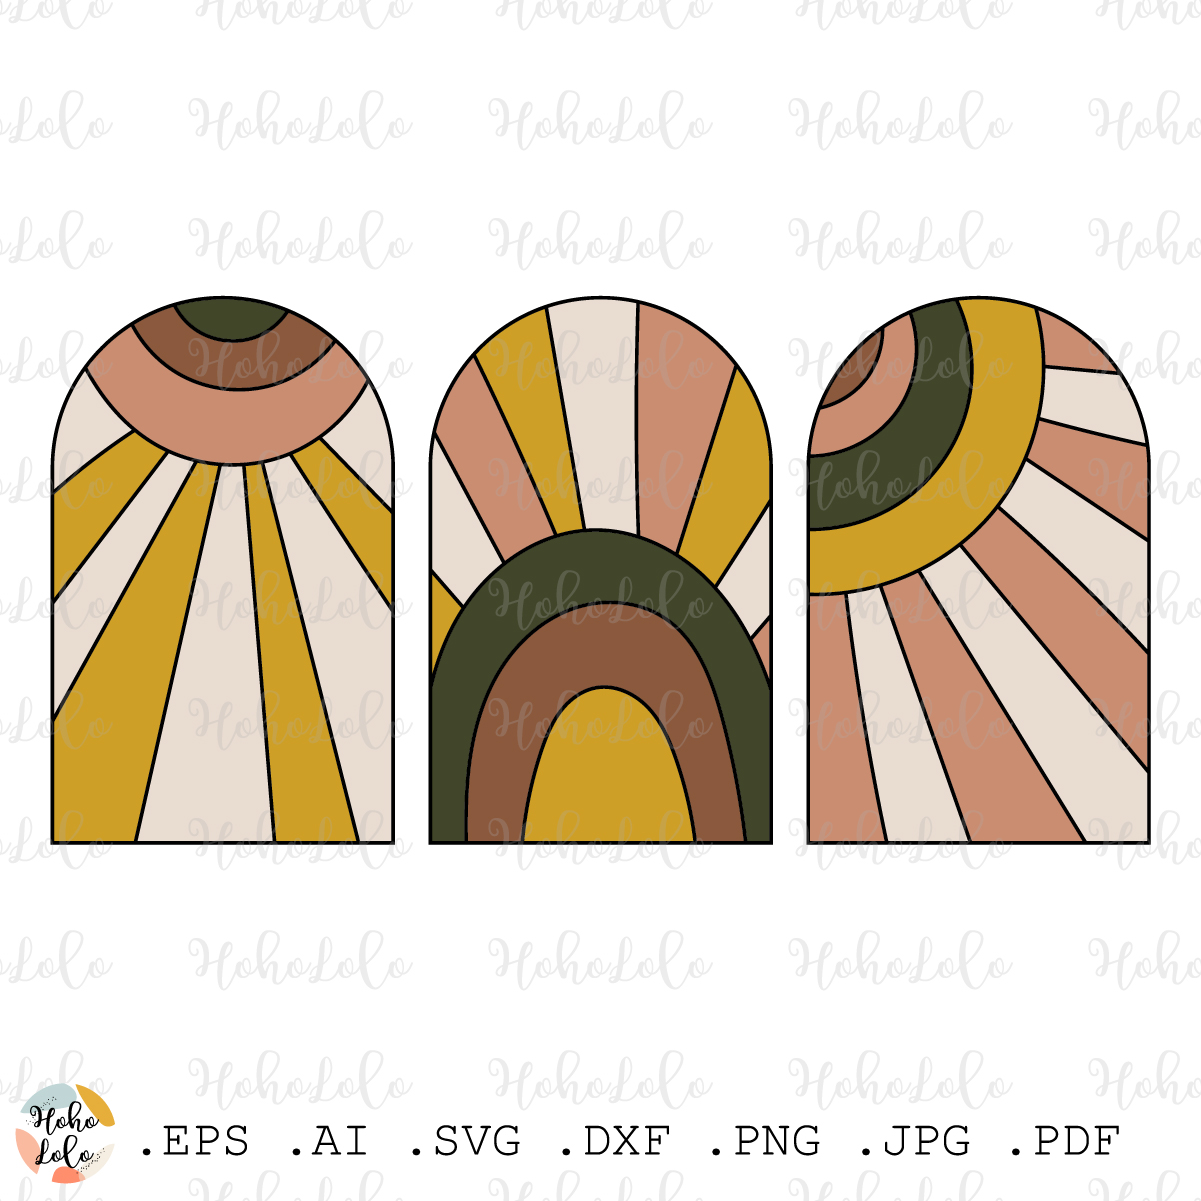 Free Printable Stained Glass Template - Printable Templates Free